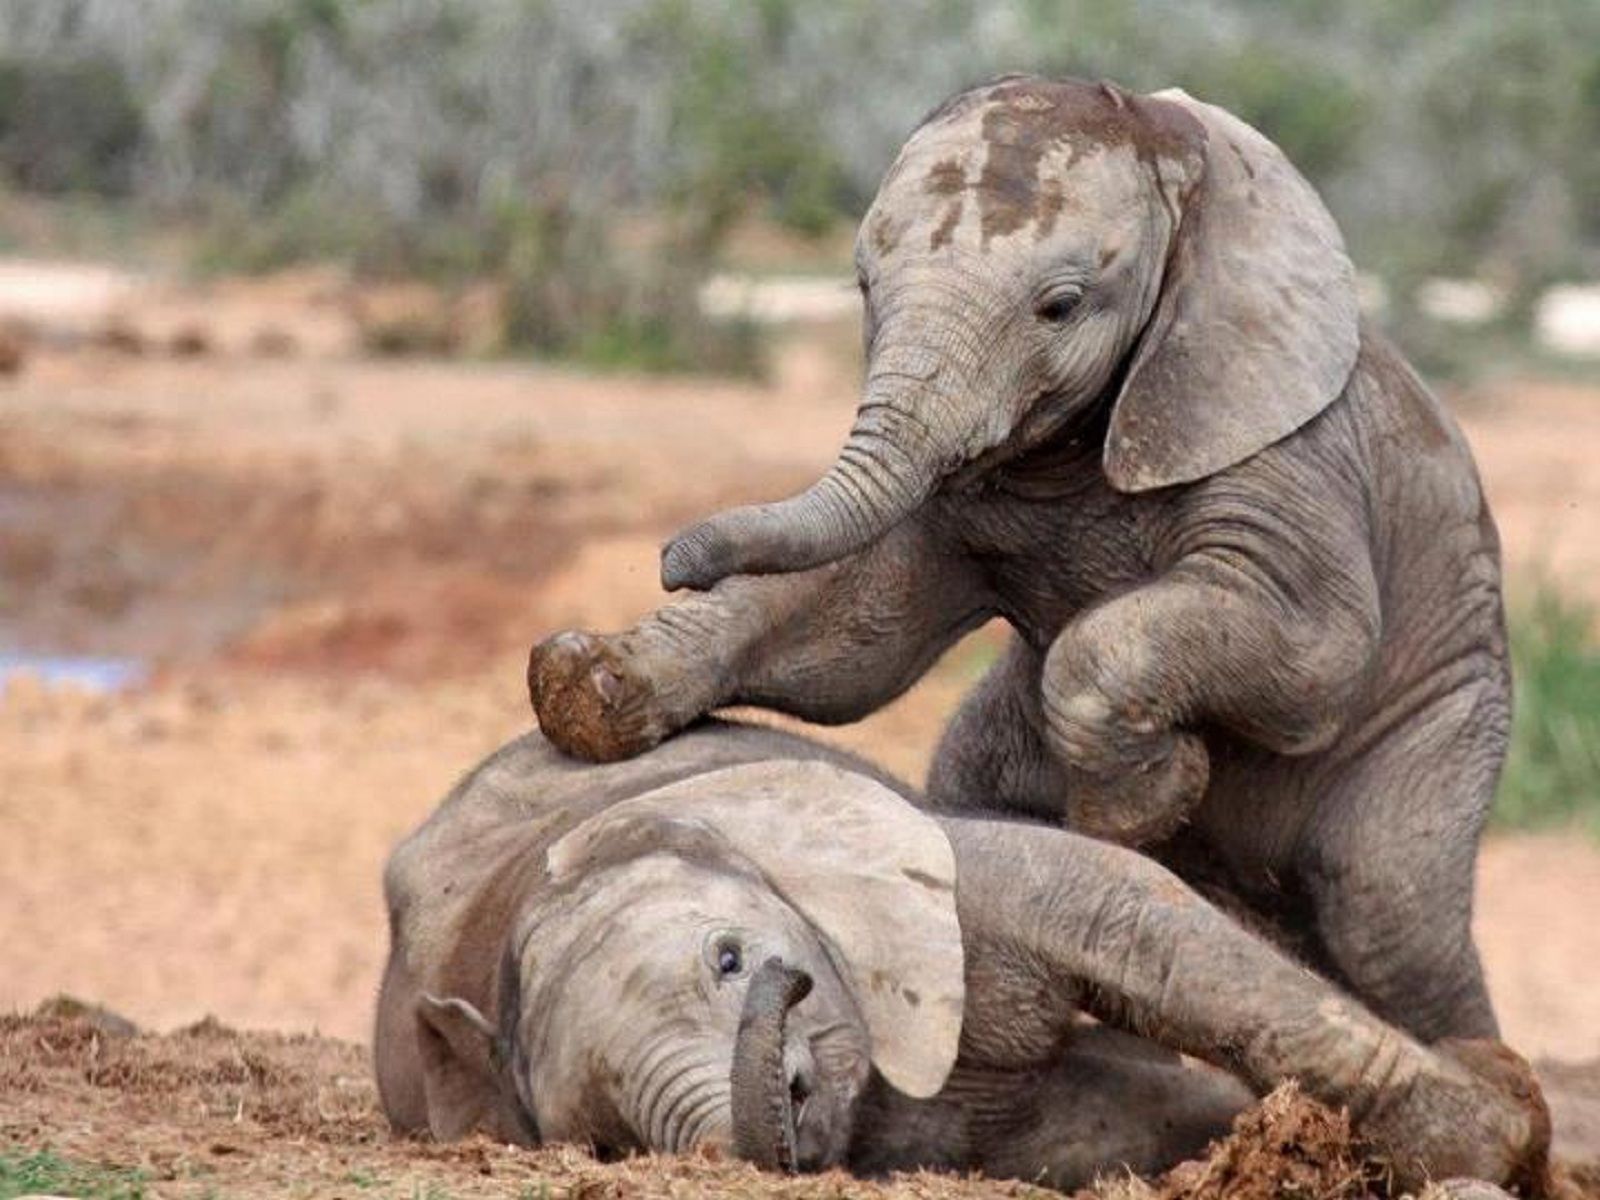 Elephants playing in the mud - Elephant